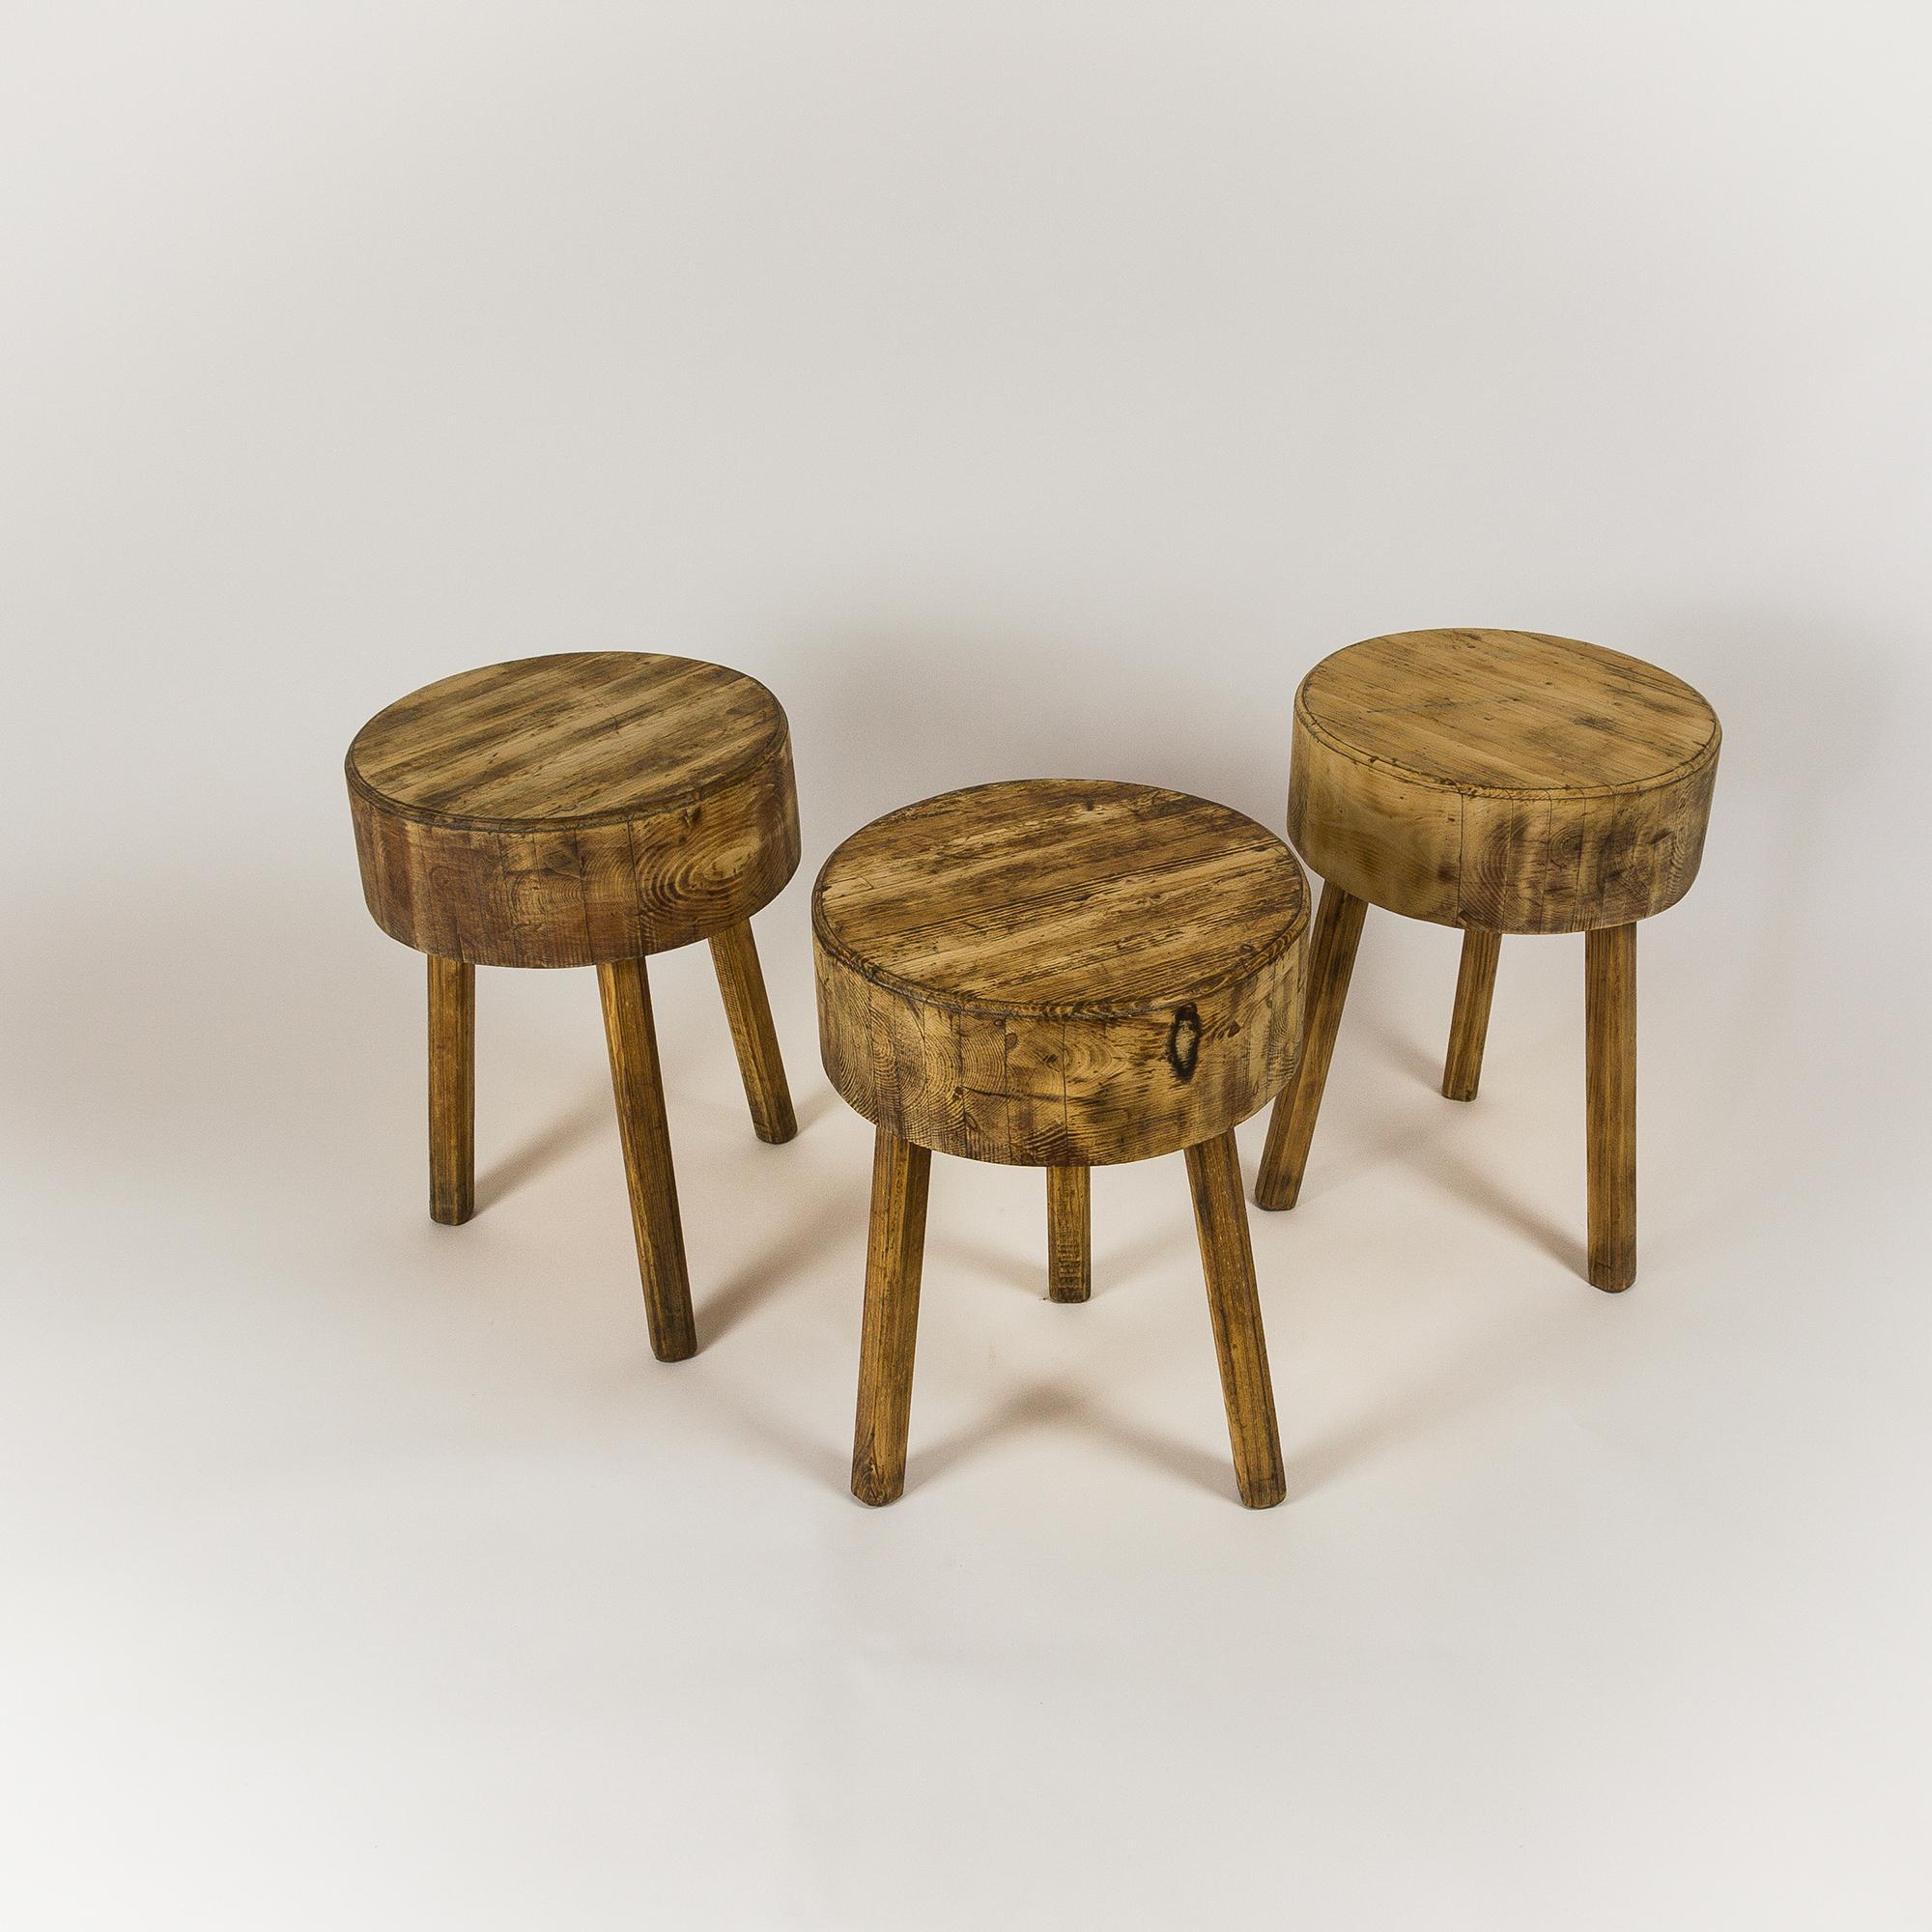 Solid three-legged estate-made stools. Perfect as seating or side table. France. Age unknown, probably circa 1950s.